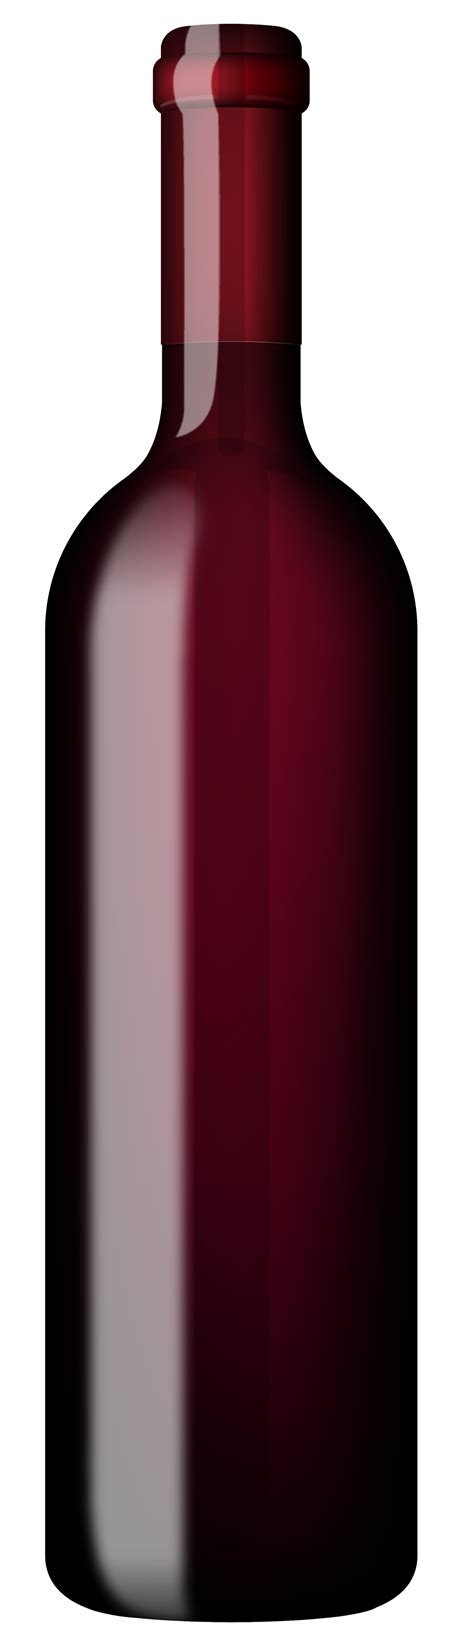 Red Bottle Of Wine Png Clipart Best Web Clipart